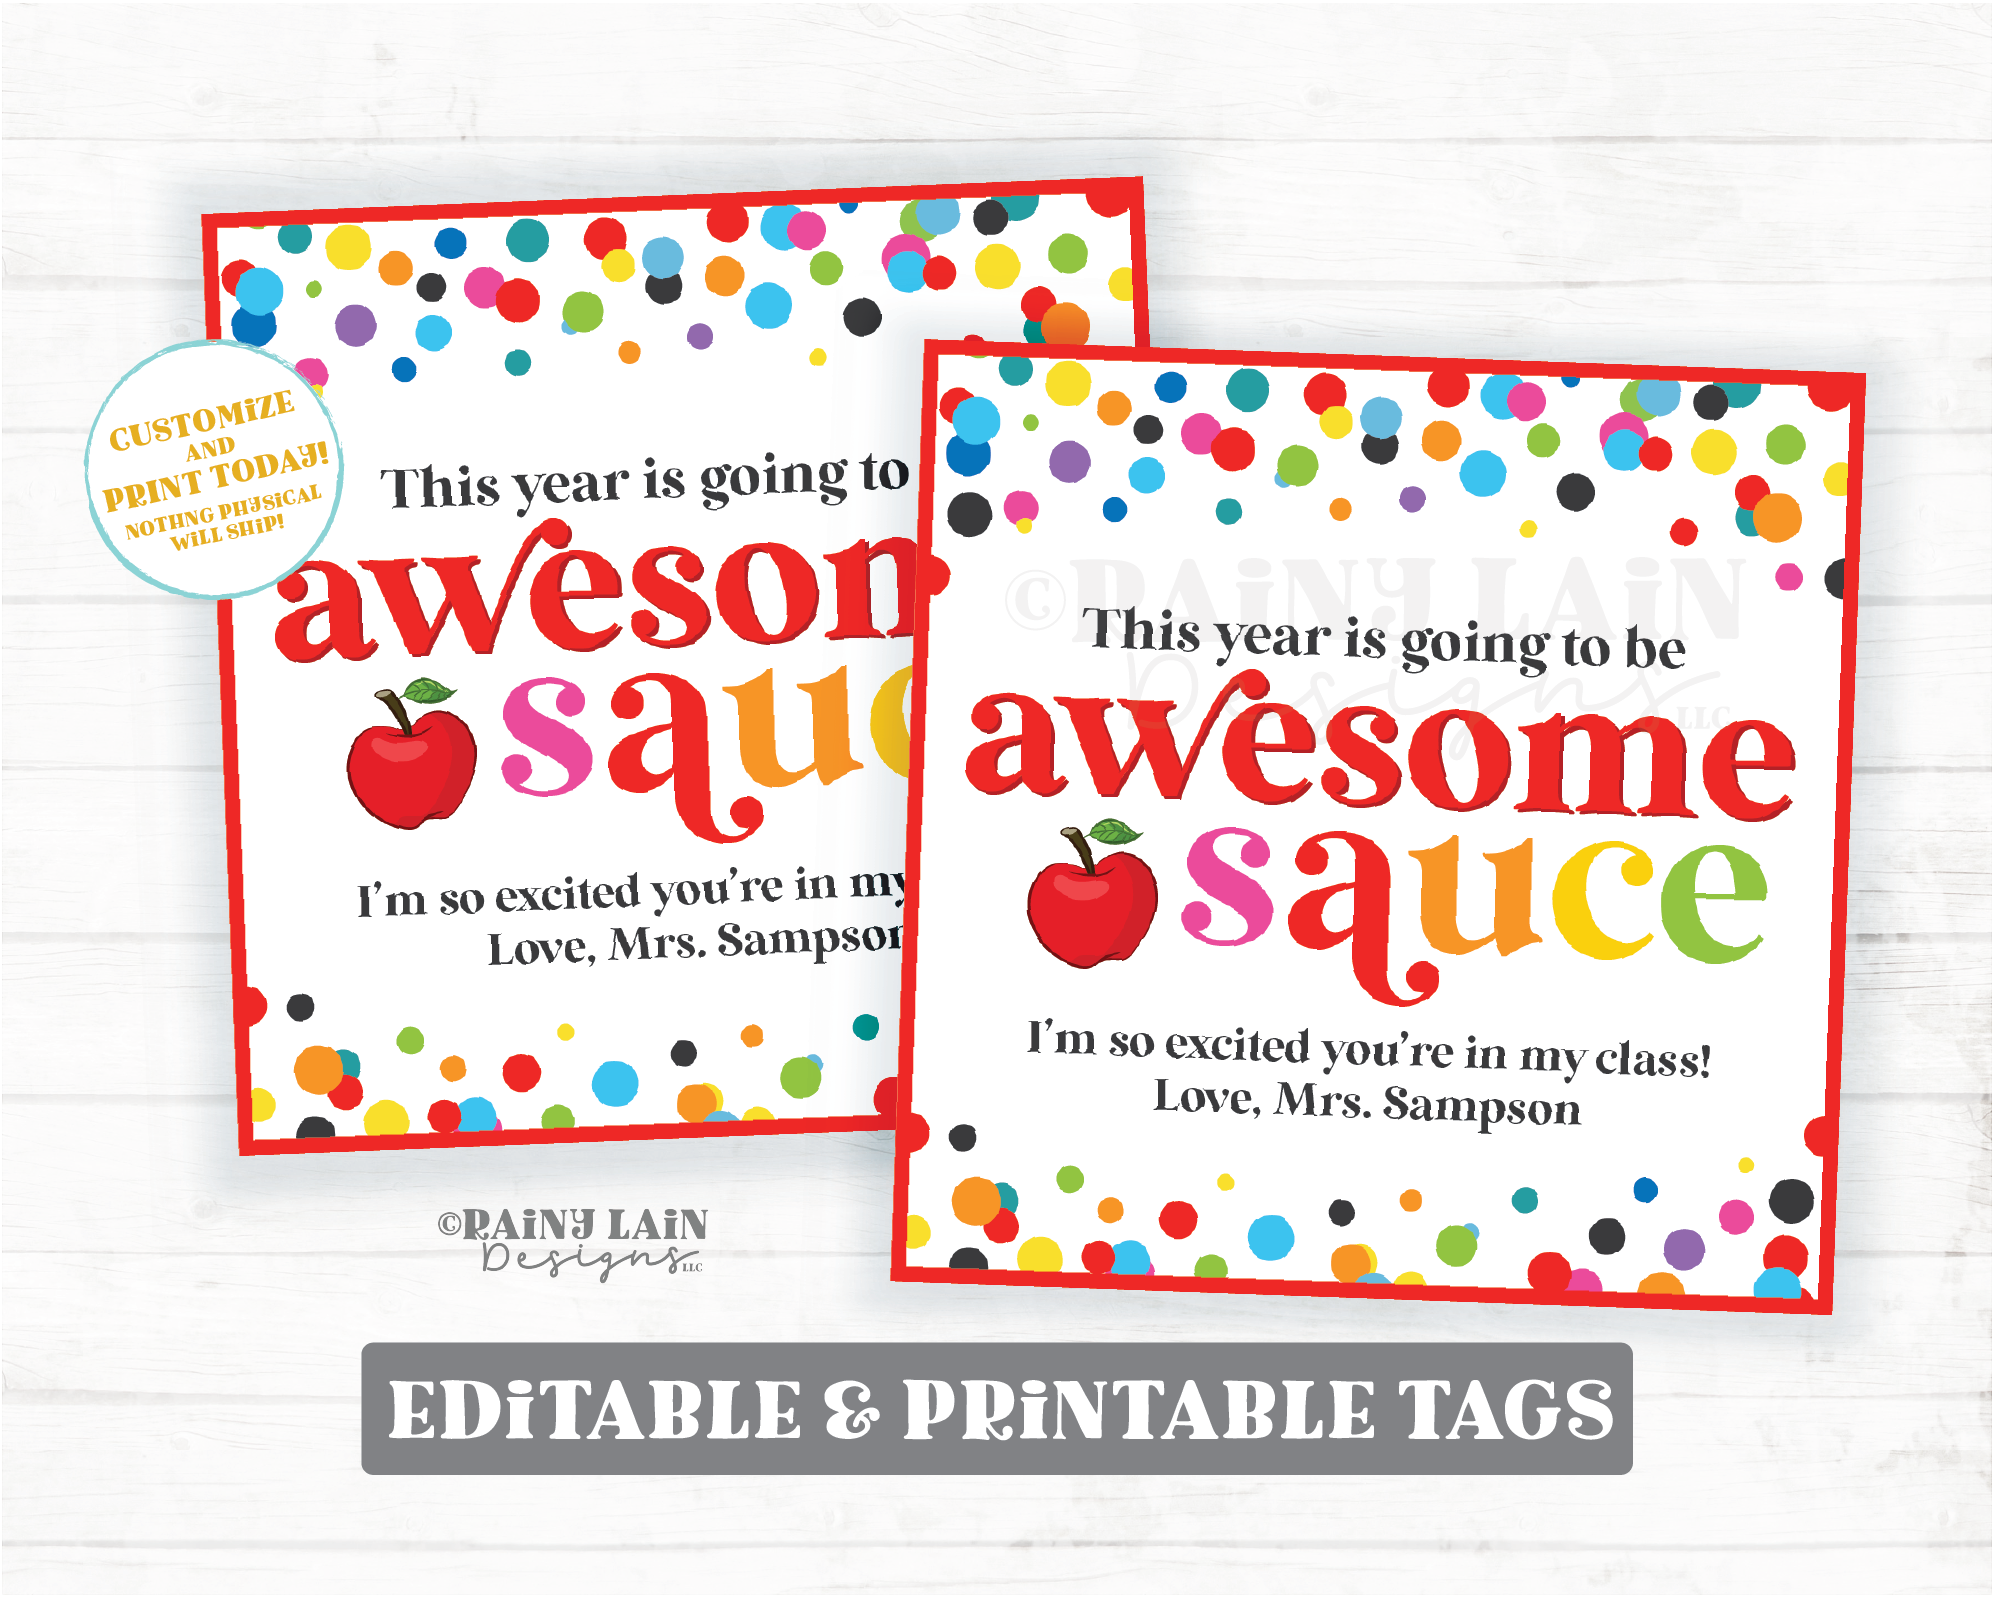 Awesome Sauce Back to School Gift Tag First Day of School Applesauce Tag Printable Student From Teacher Favor PTO Classroom Apple Sauce